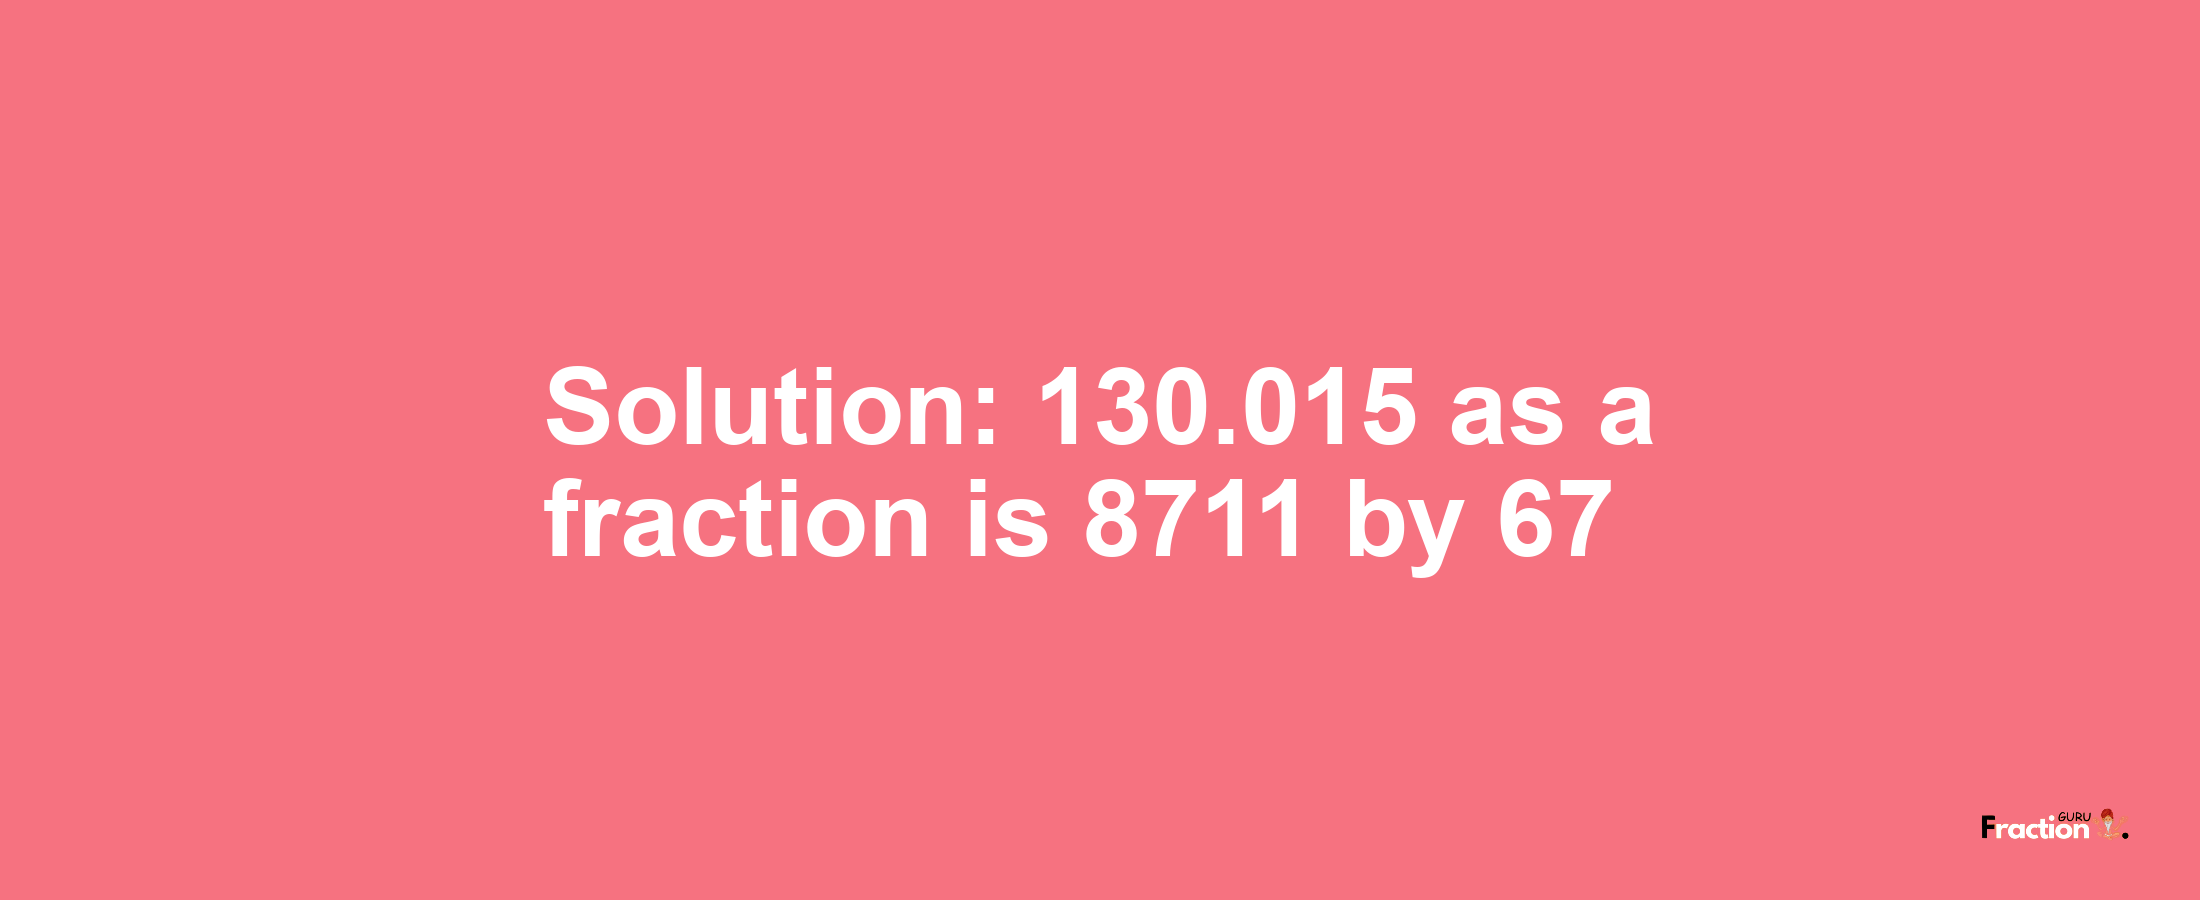 Solution:130.015 as a fraction is 8711/67